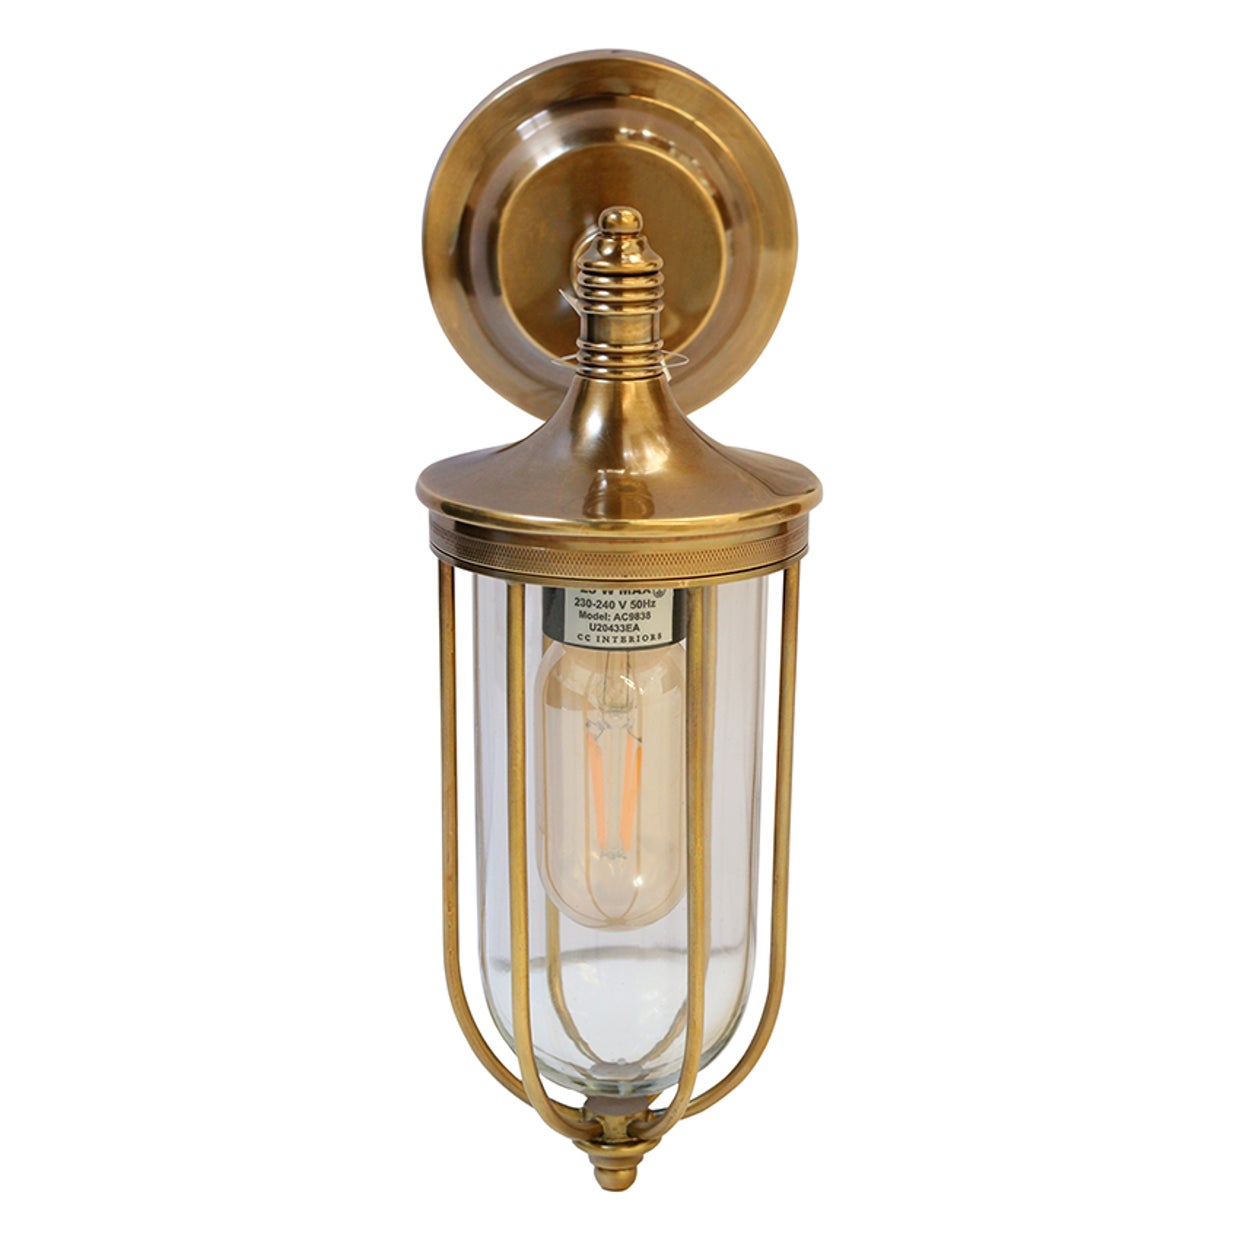 Outdoor IP54 Cage Wall Light in Antique Brass Finish